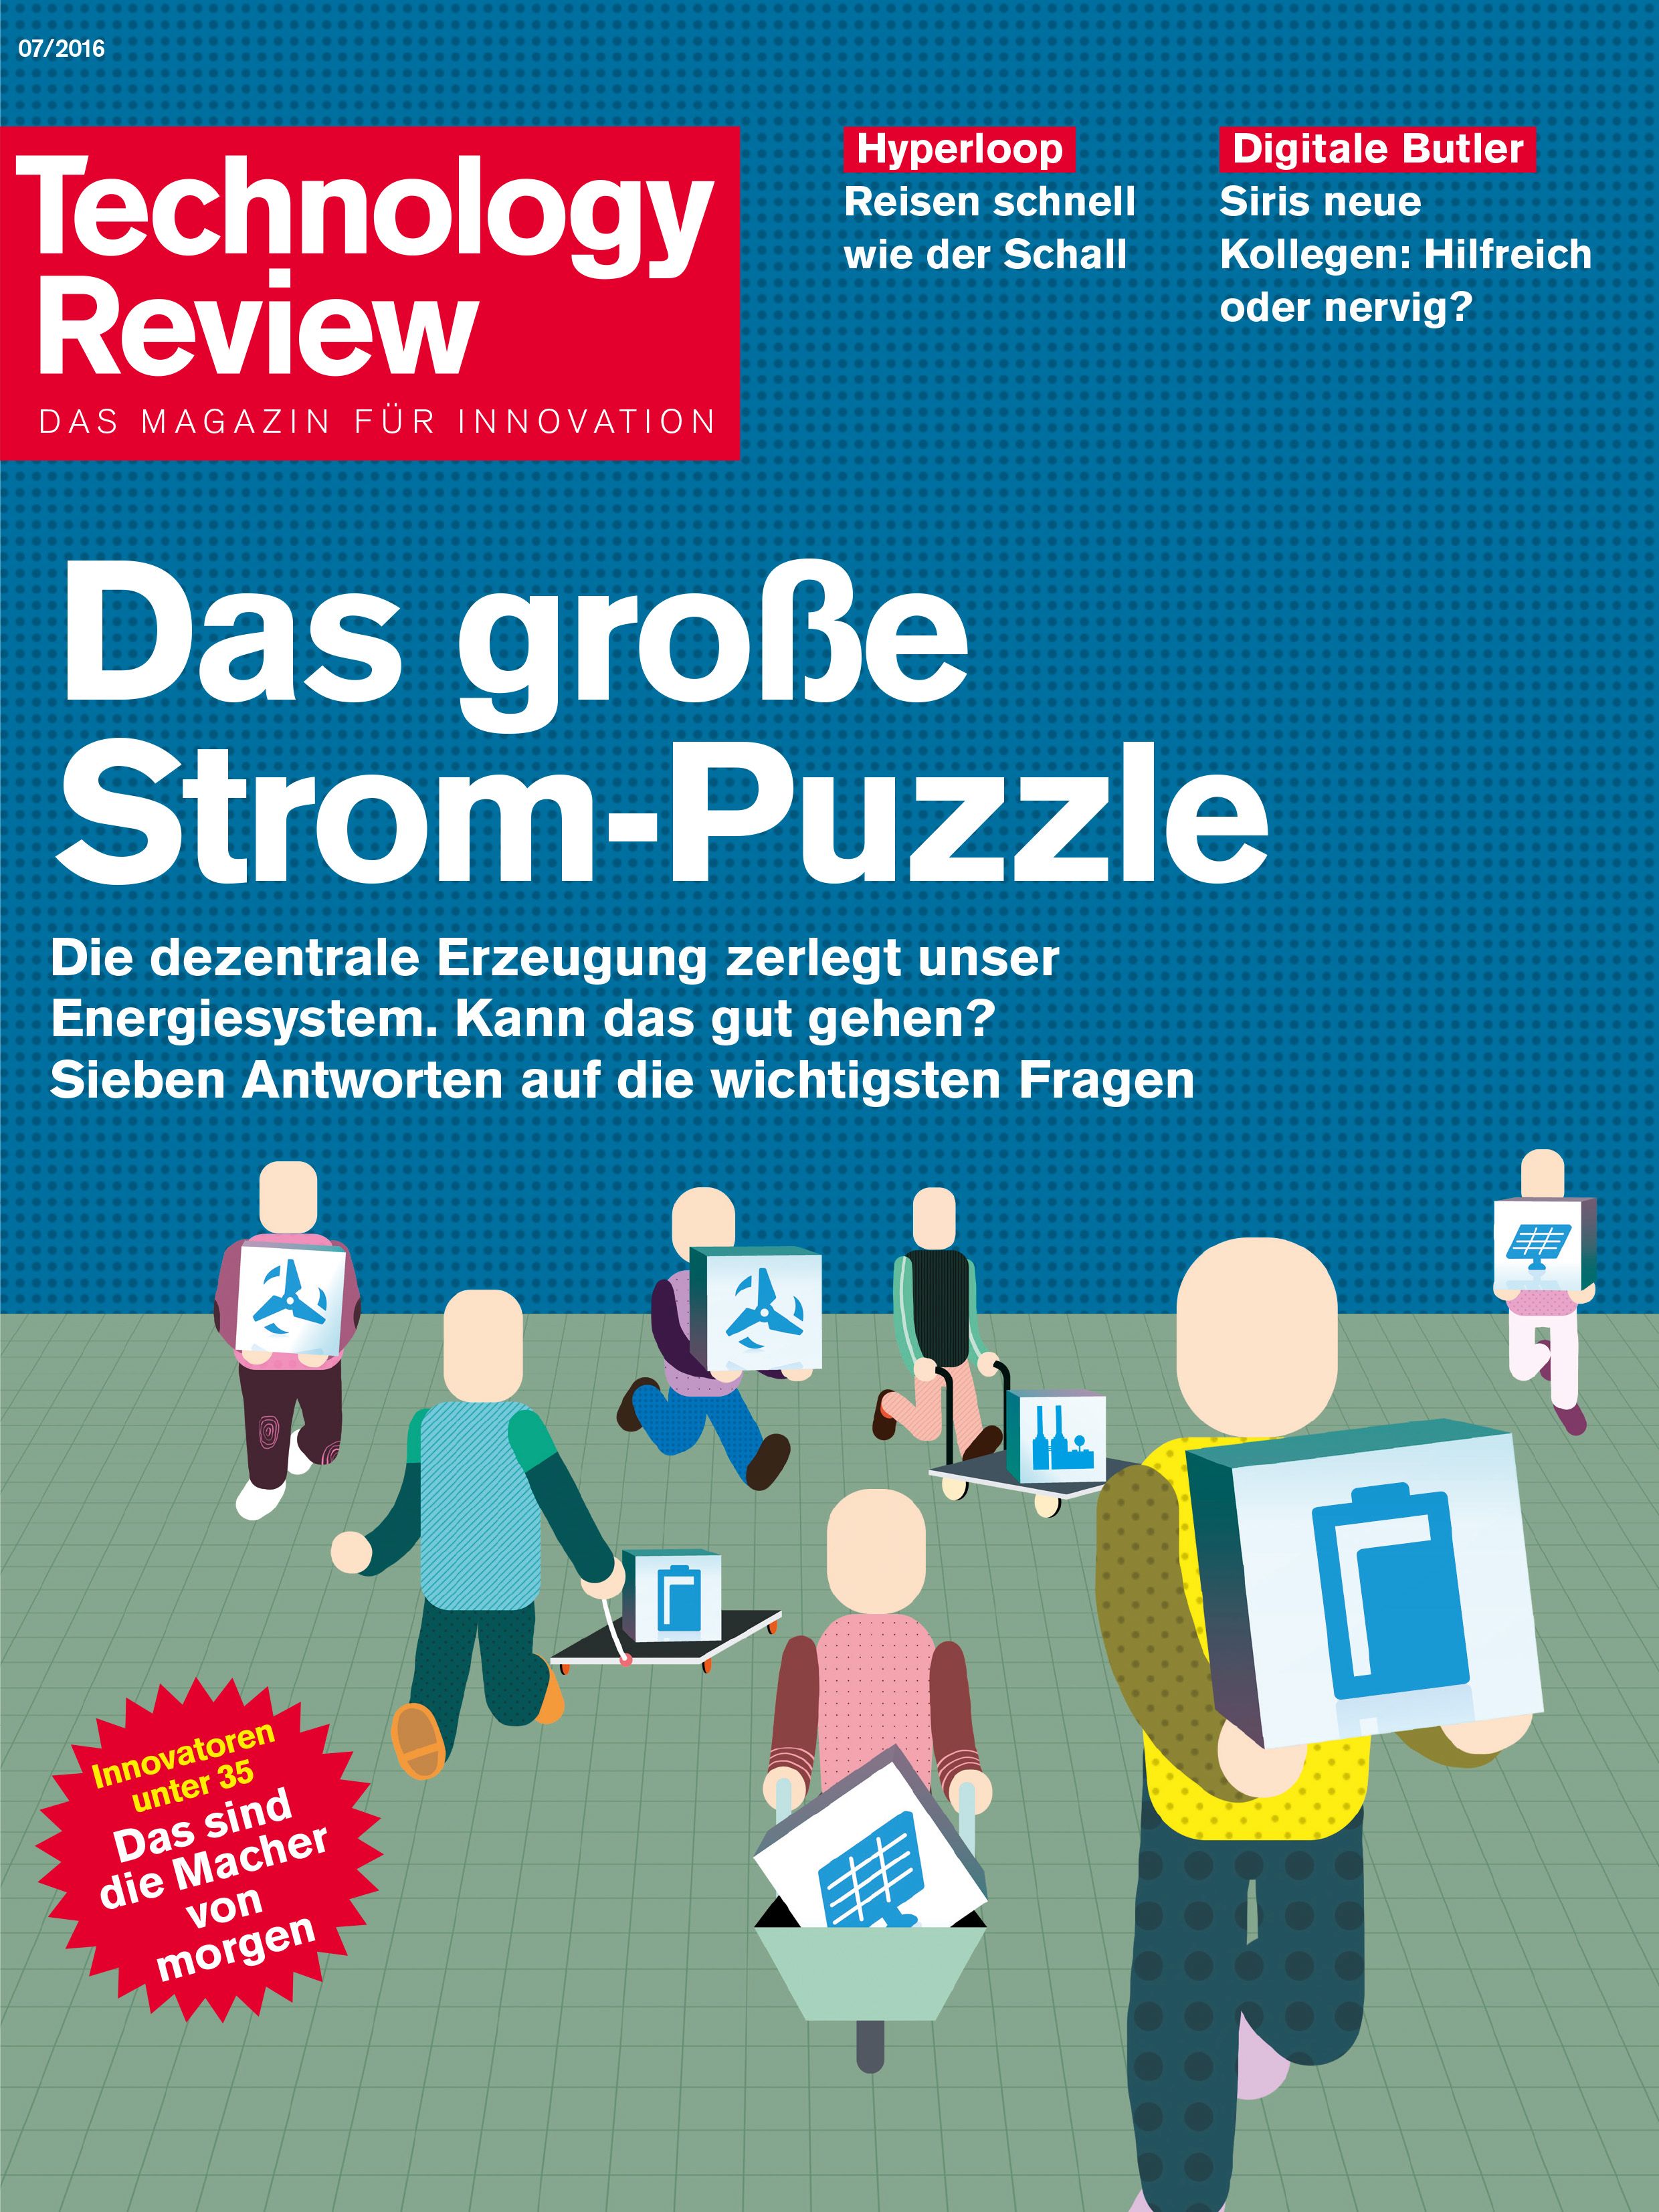 Technology Review 07/2016